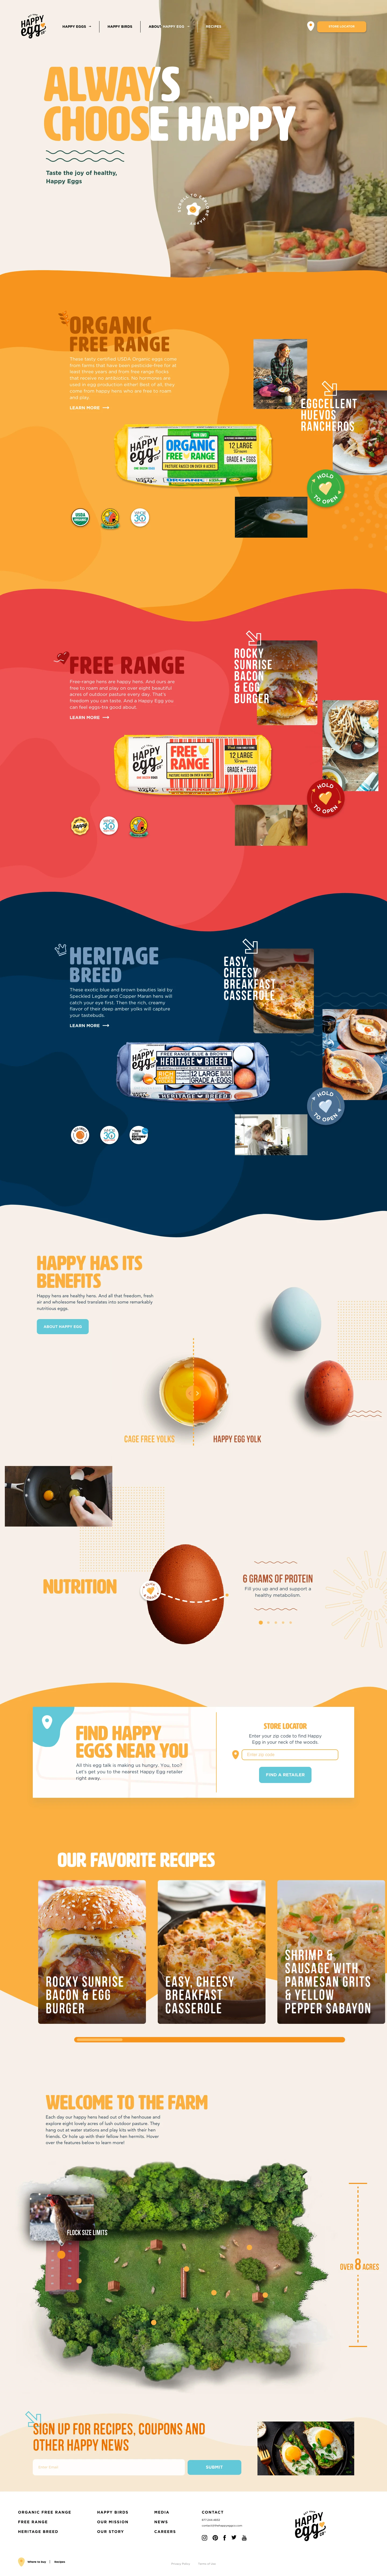 Happy Eggs Landing Page Example: We all make choices in life. At the Happy Egg Co, we choose to make ours maximize health and happiness. We know happy farmers make for happy hens. Happy hens lay happy, healthy eggs. And Happy Eggs make everybody happy. Not to mention healthy.